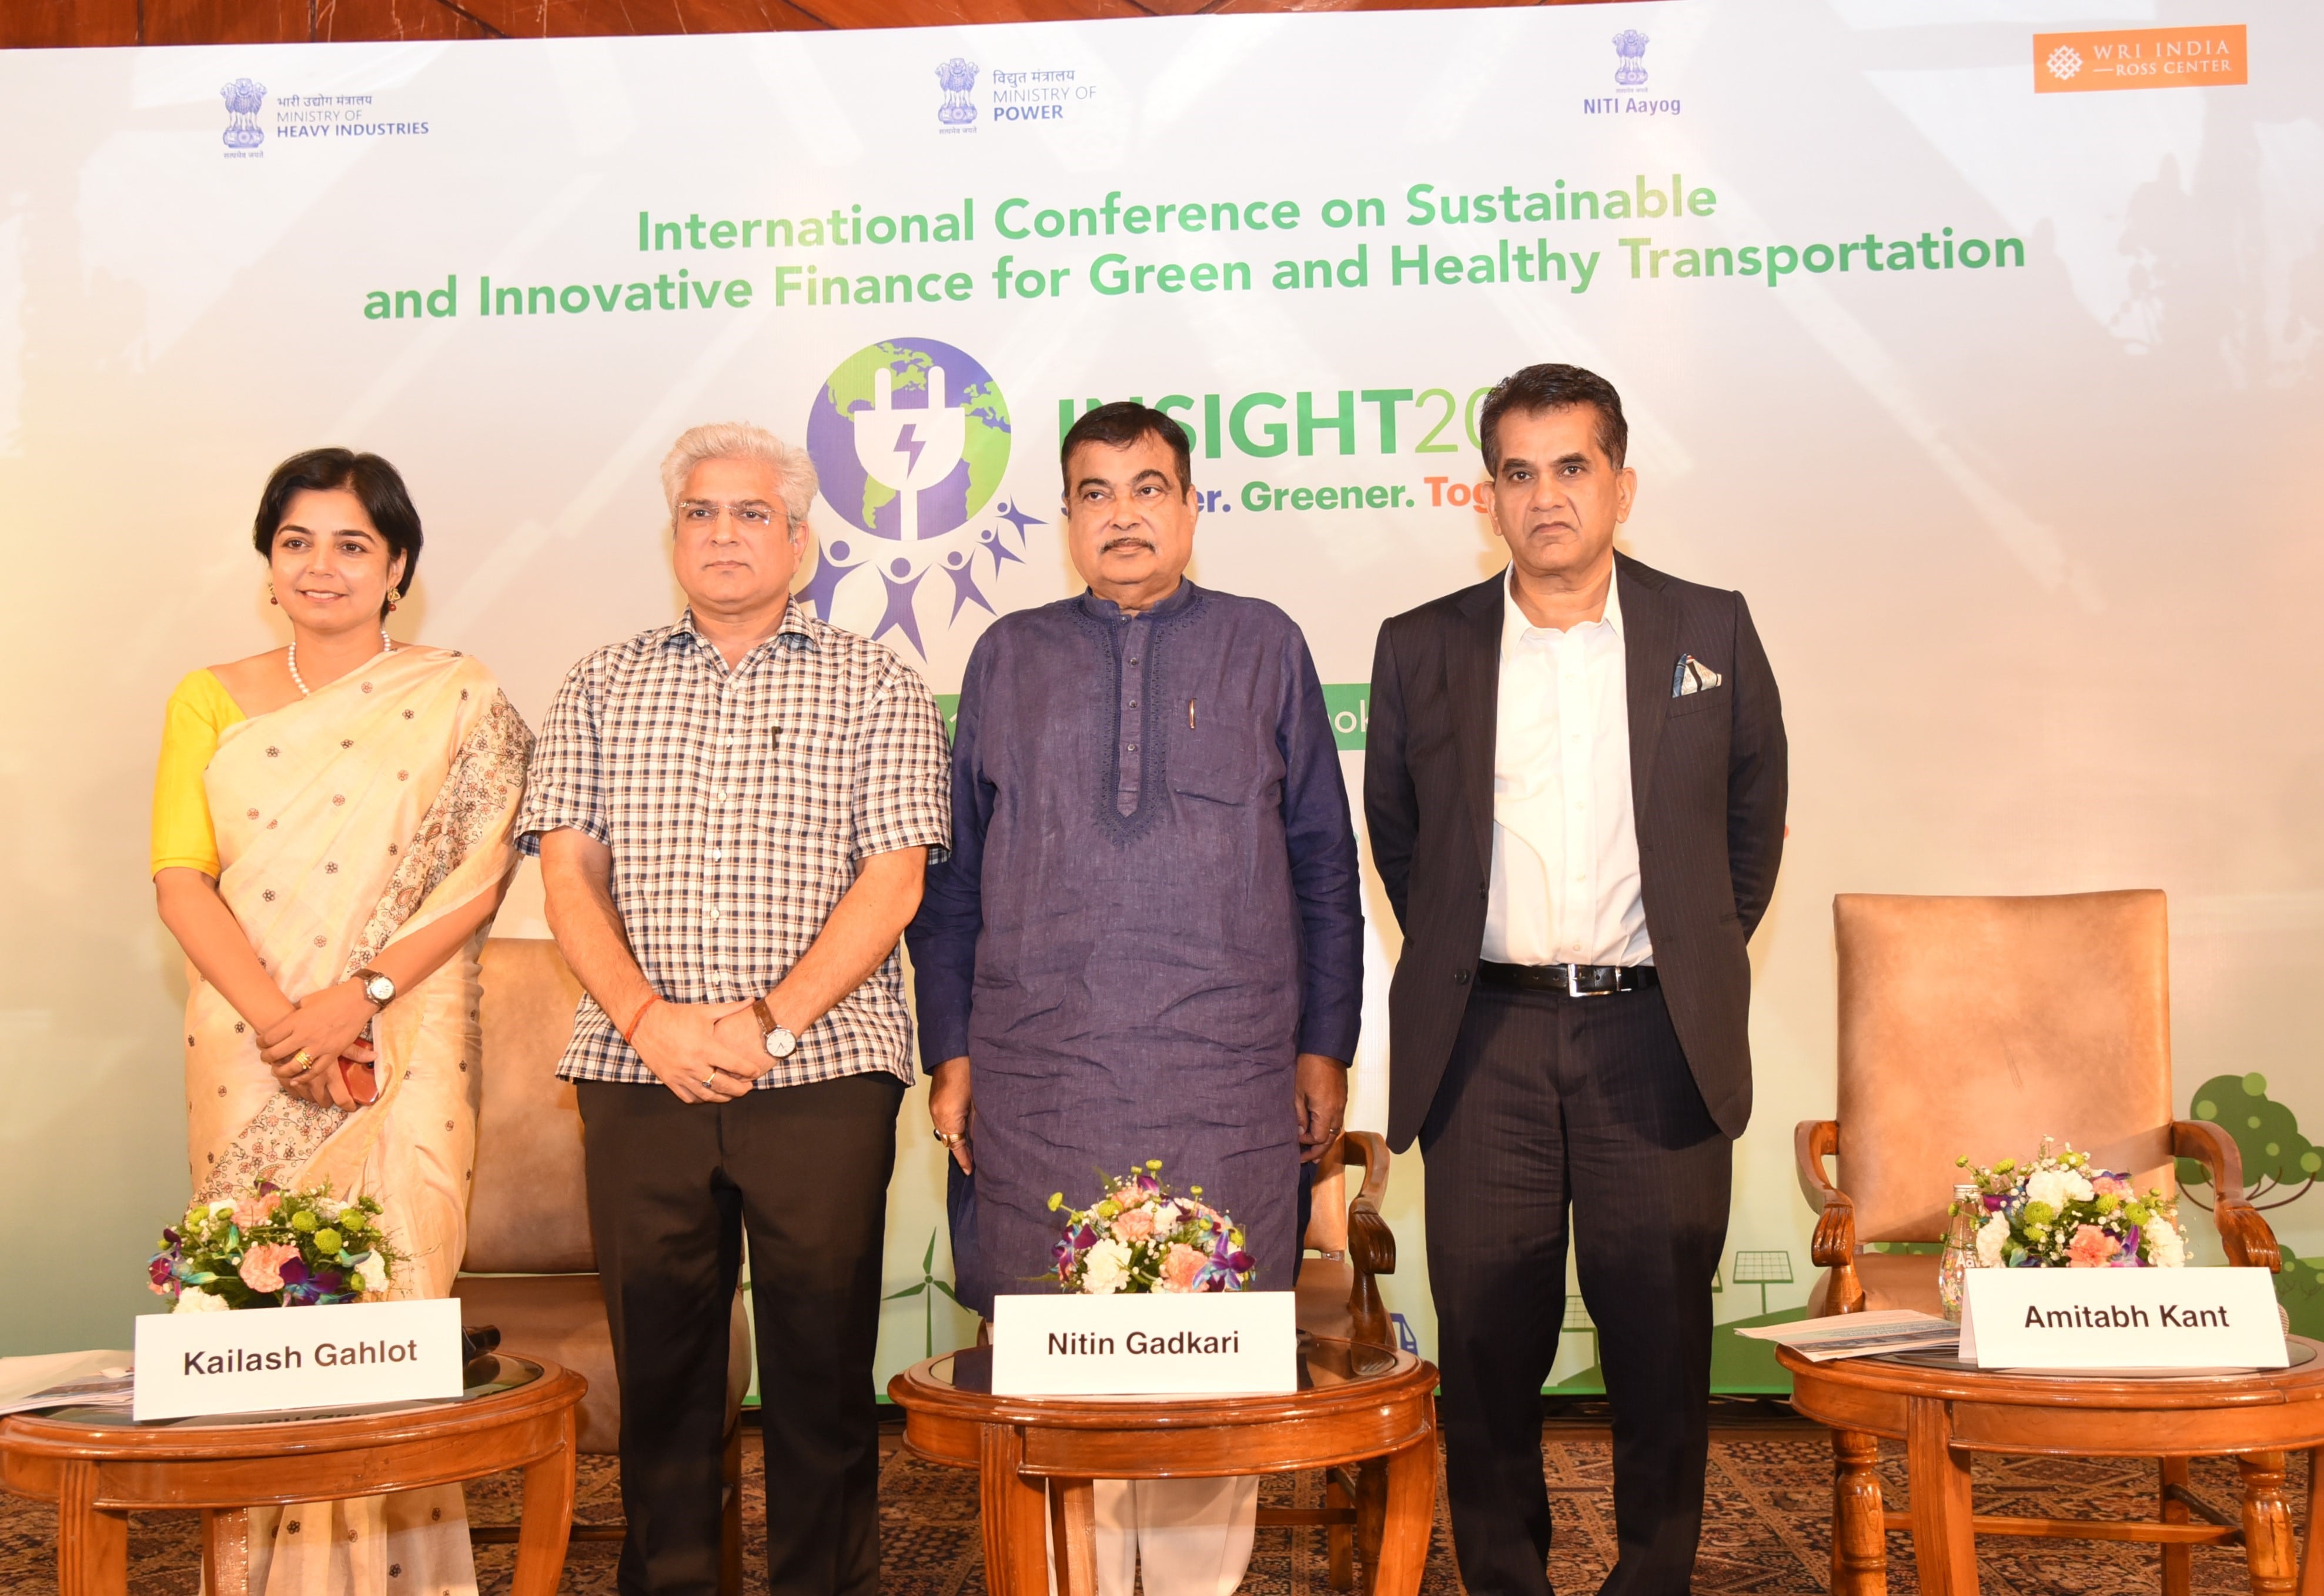 PRESS RELEASE: Convergence Energy Services Limited (CESL) and WRI India jointly host INSIGHT 2022 to prepare stakeholders for making India a world leader in public e-mobility